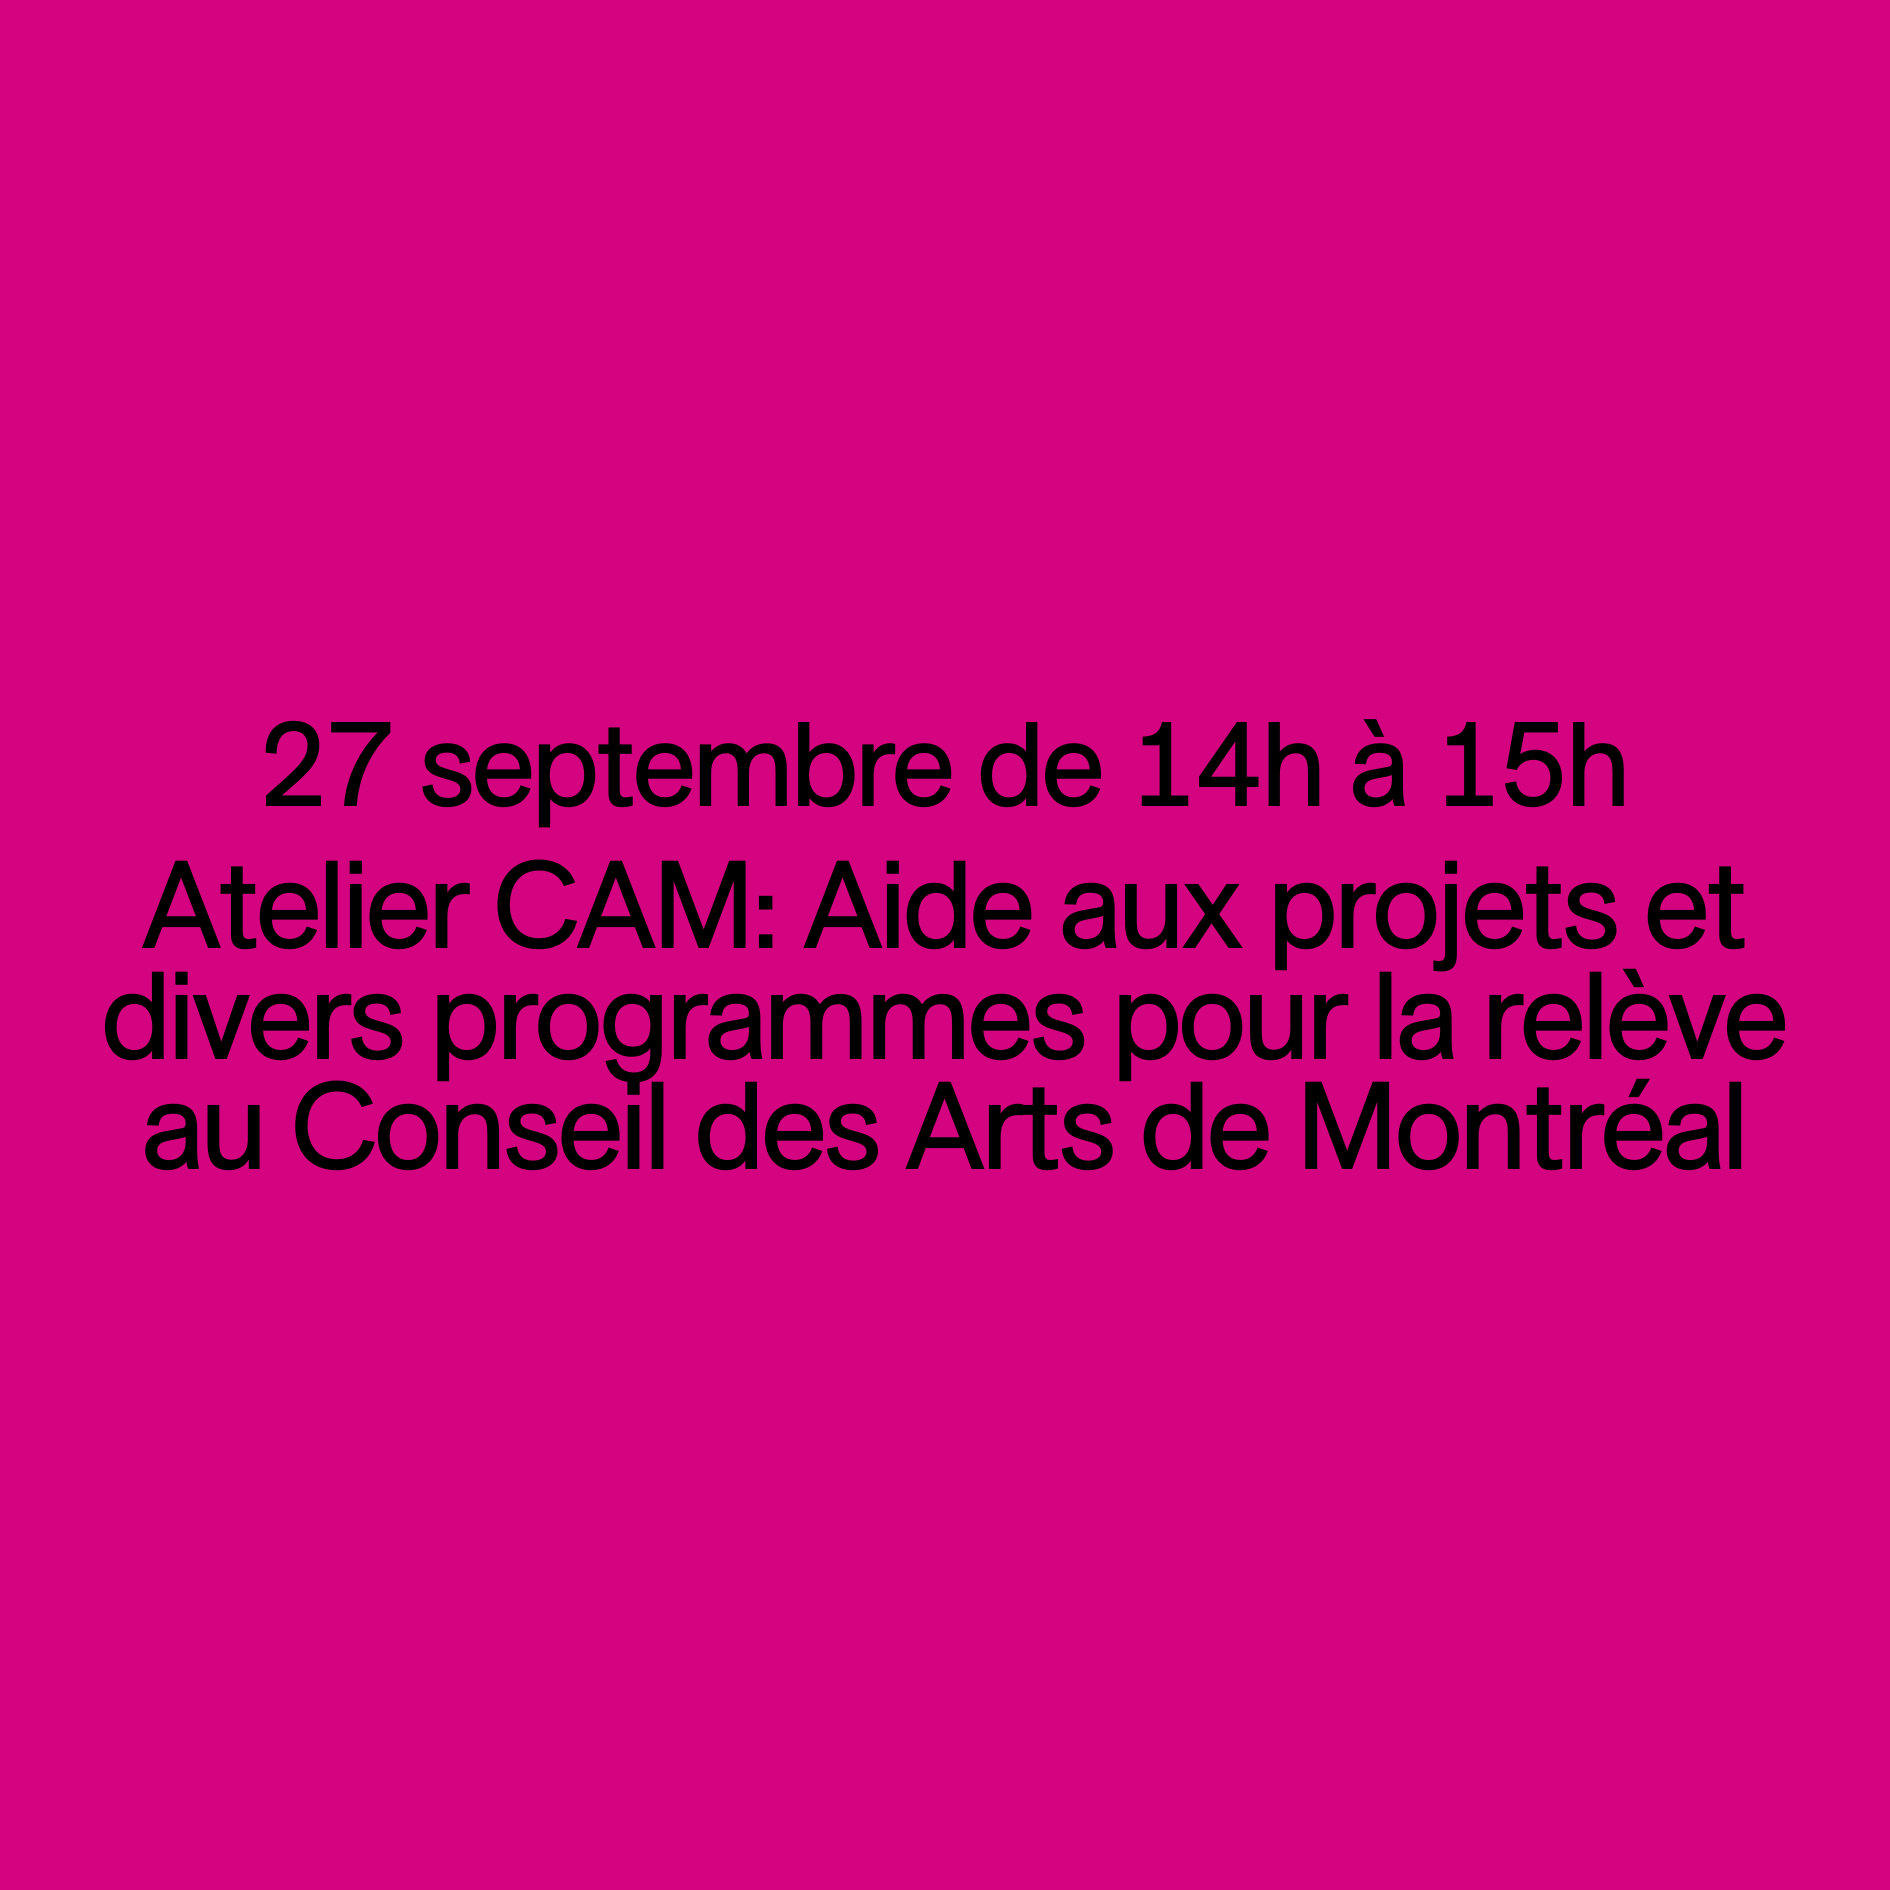 CAM Workshop - Project assistance and various programs for emerging artists at the CAM